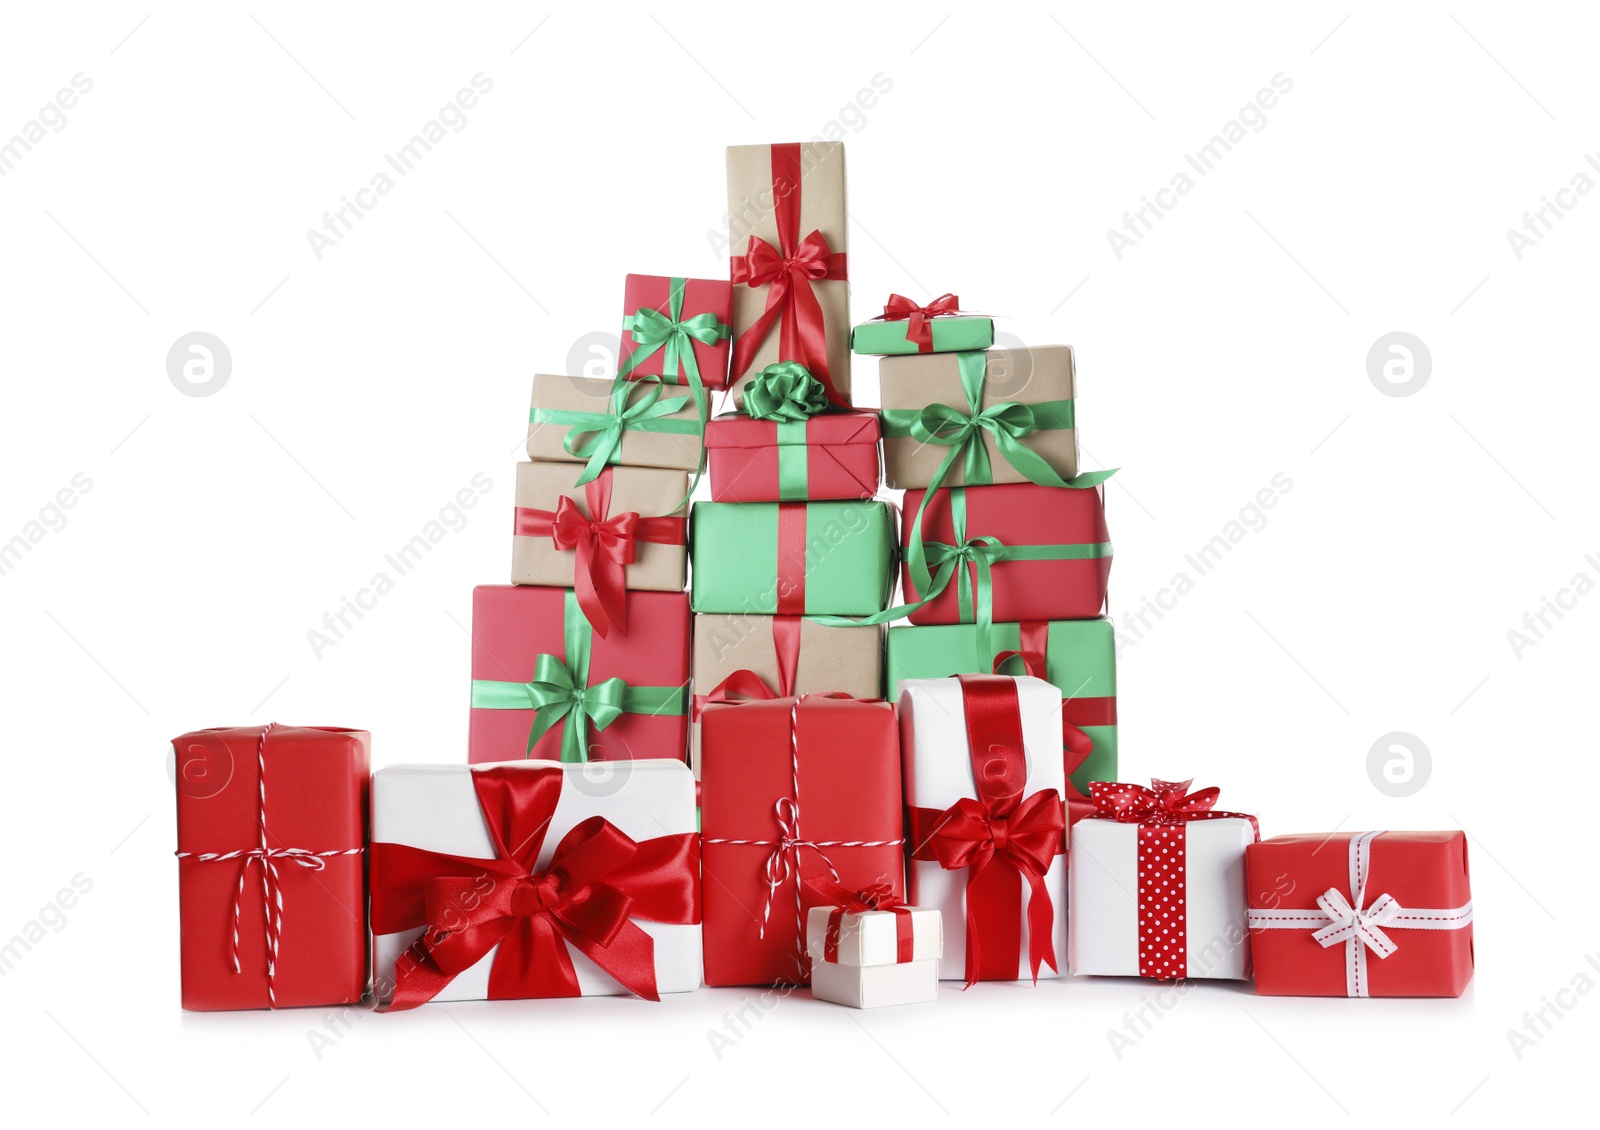 Image of Many different Christmas gift boxes on white background